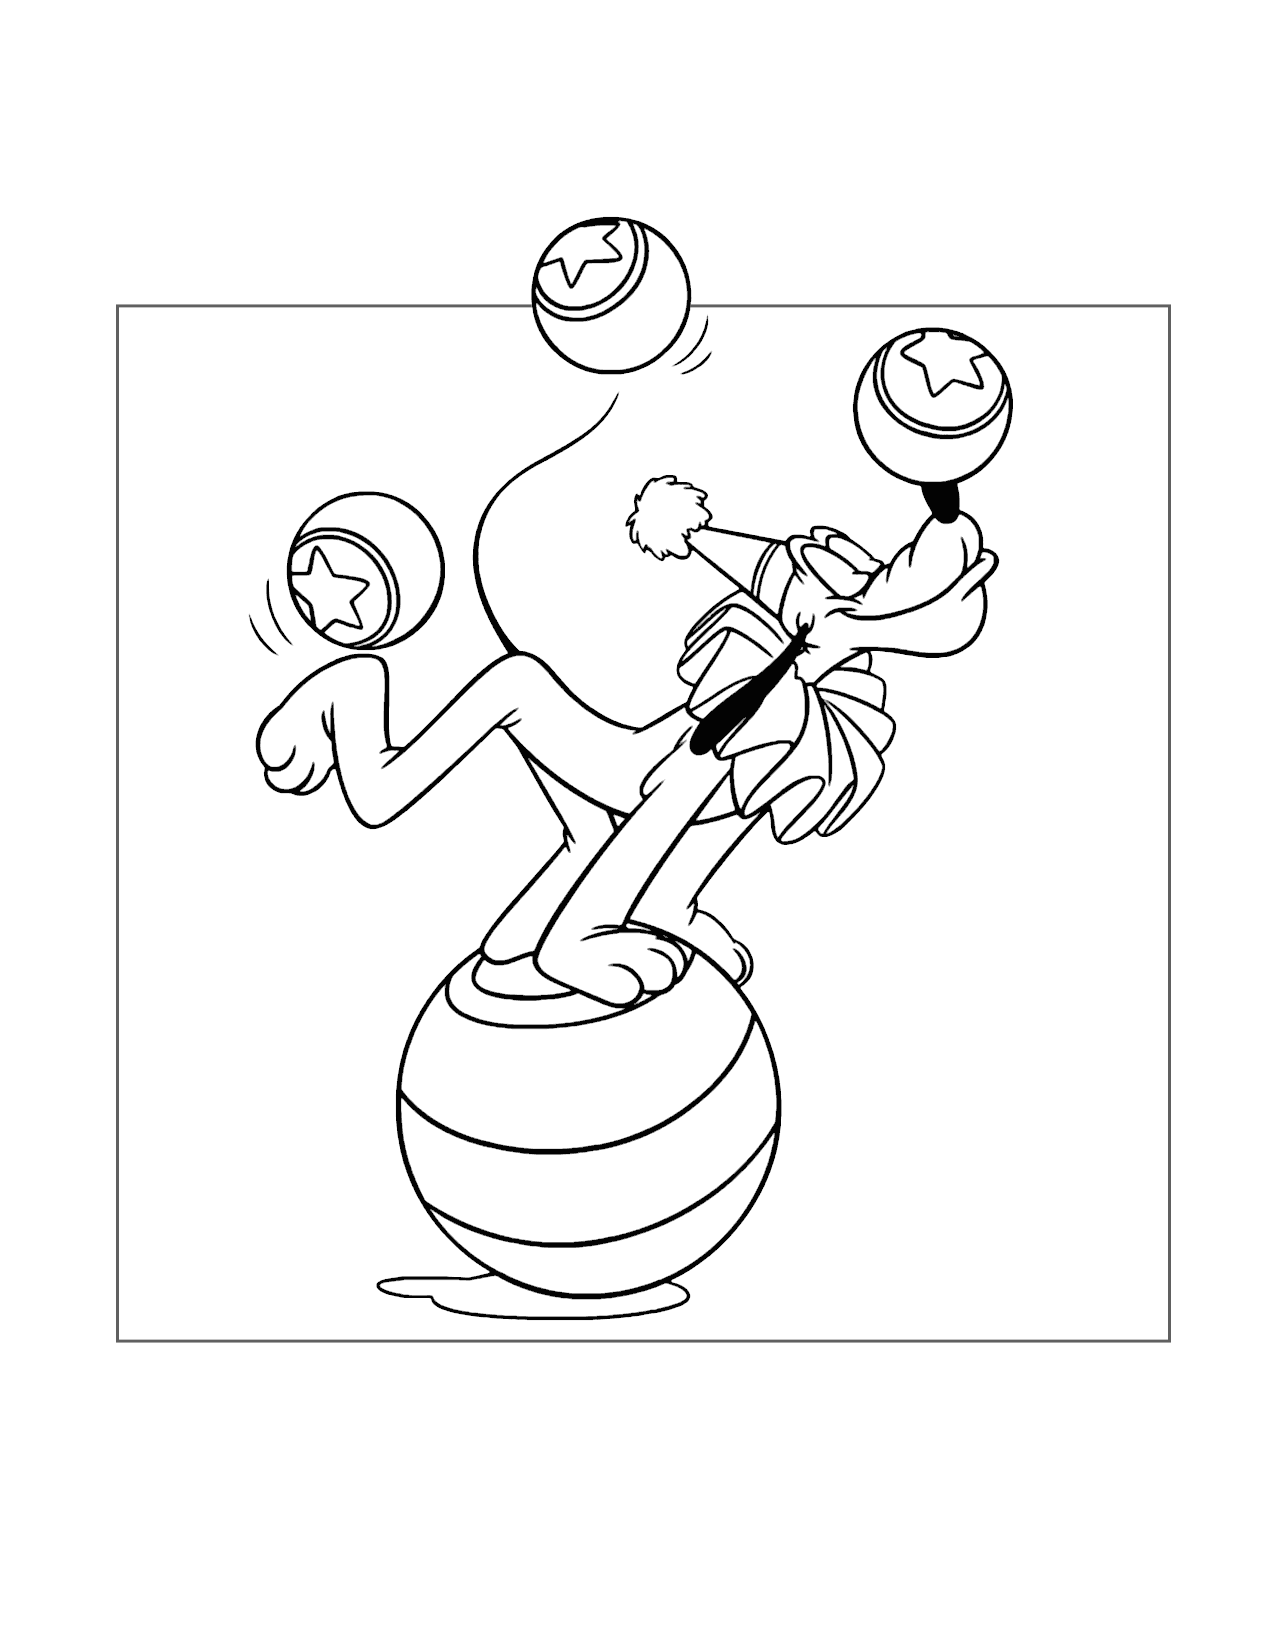 Circus Pluto Does Tricks Coloring Page